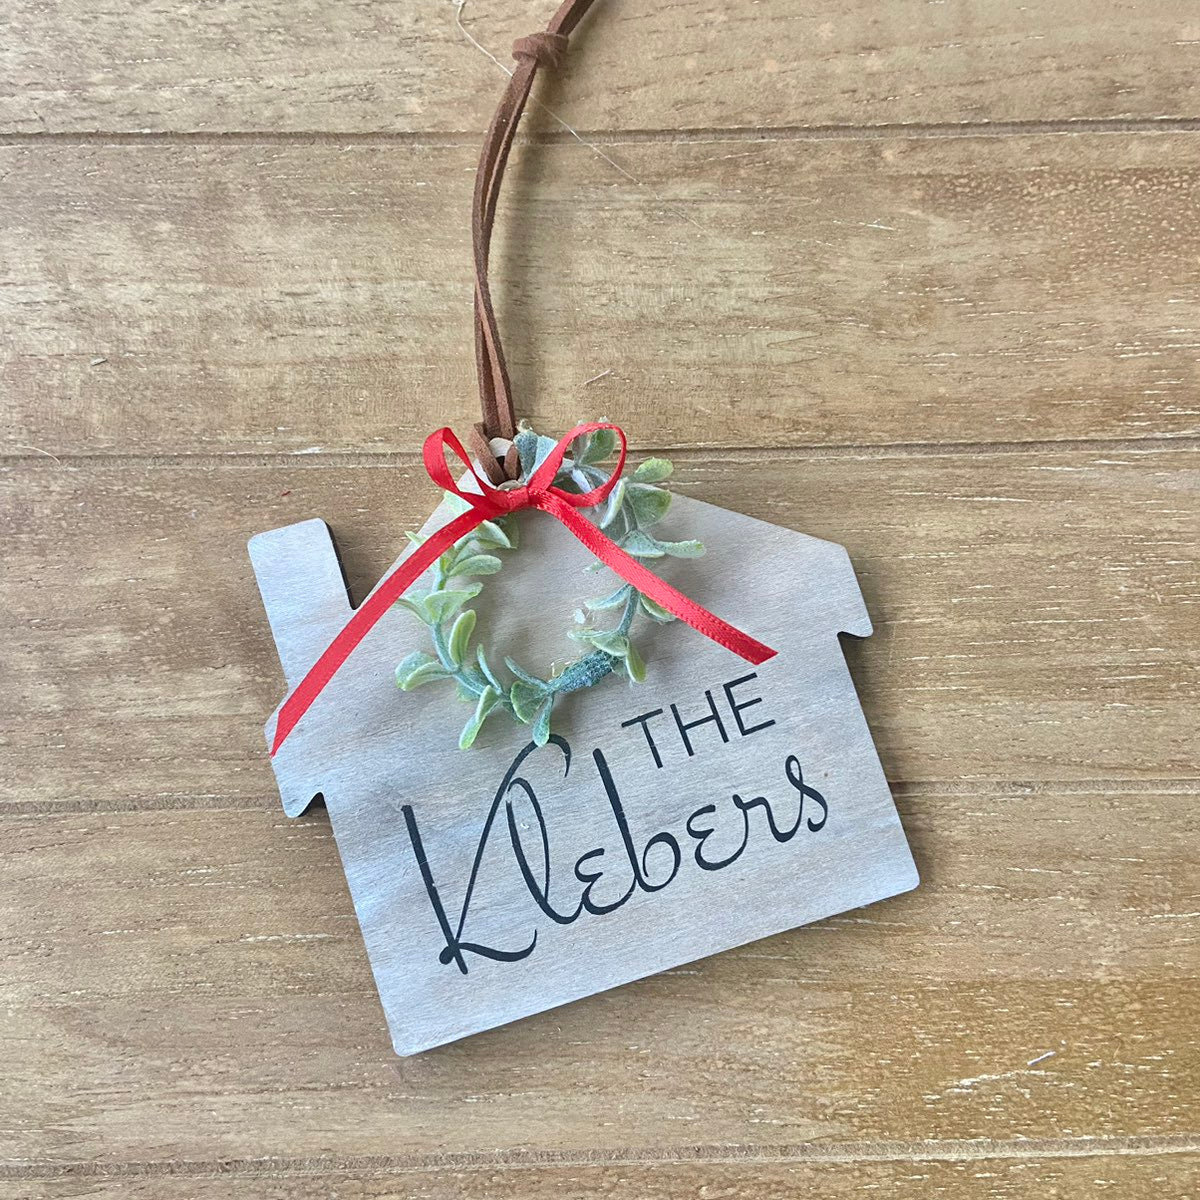 DIY Personalized Family Name House Ornament